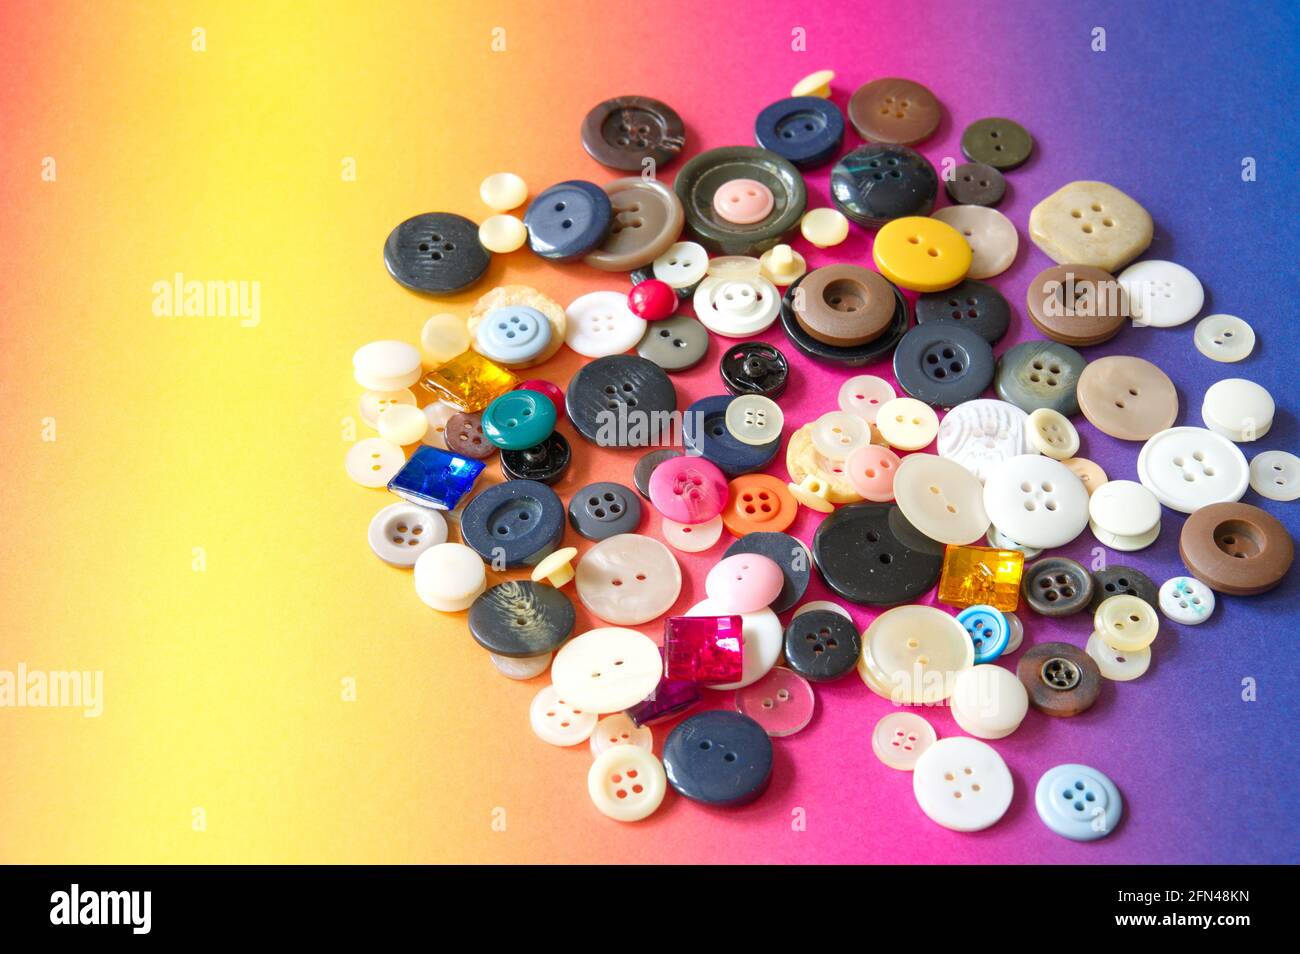 Flat lay of sewing buttons on colorful background Stock Photo